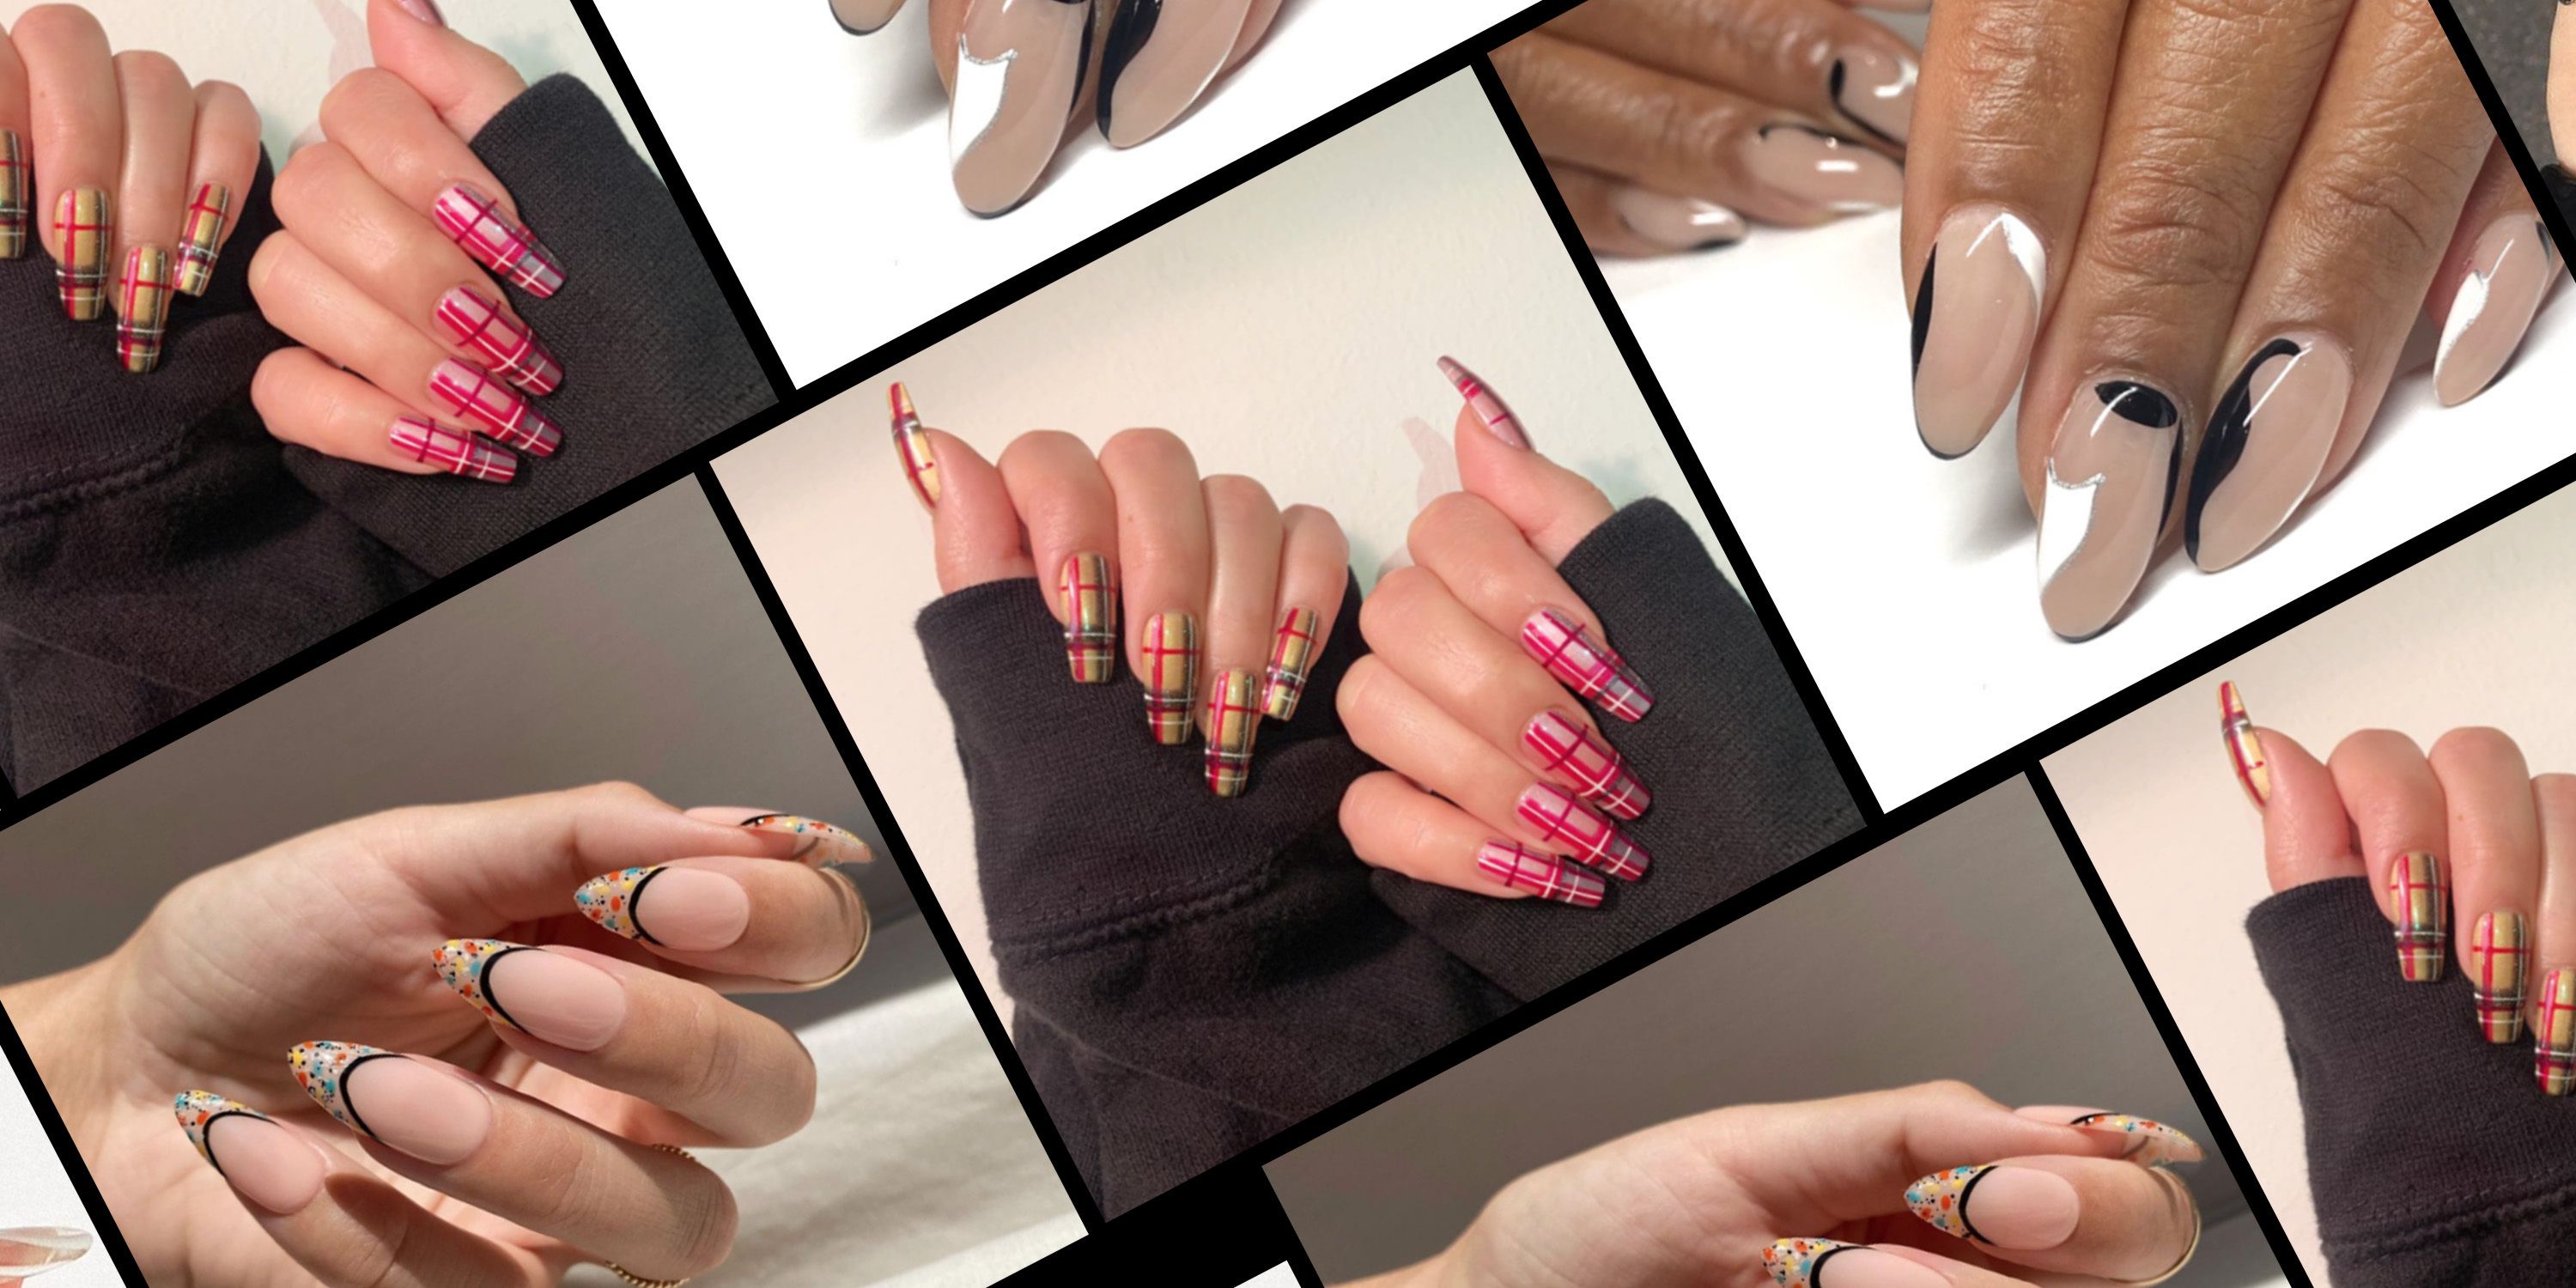 Supplies for Acrylic Nails: 21 Must-Have Tools and Products